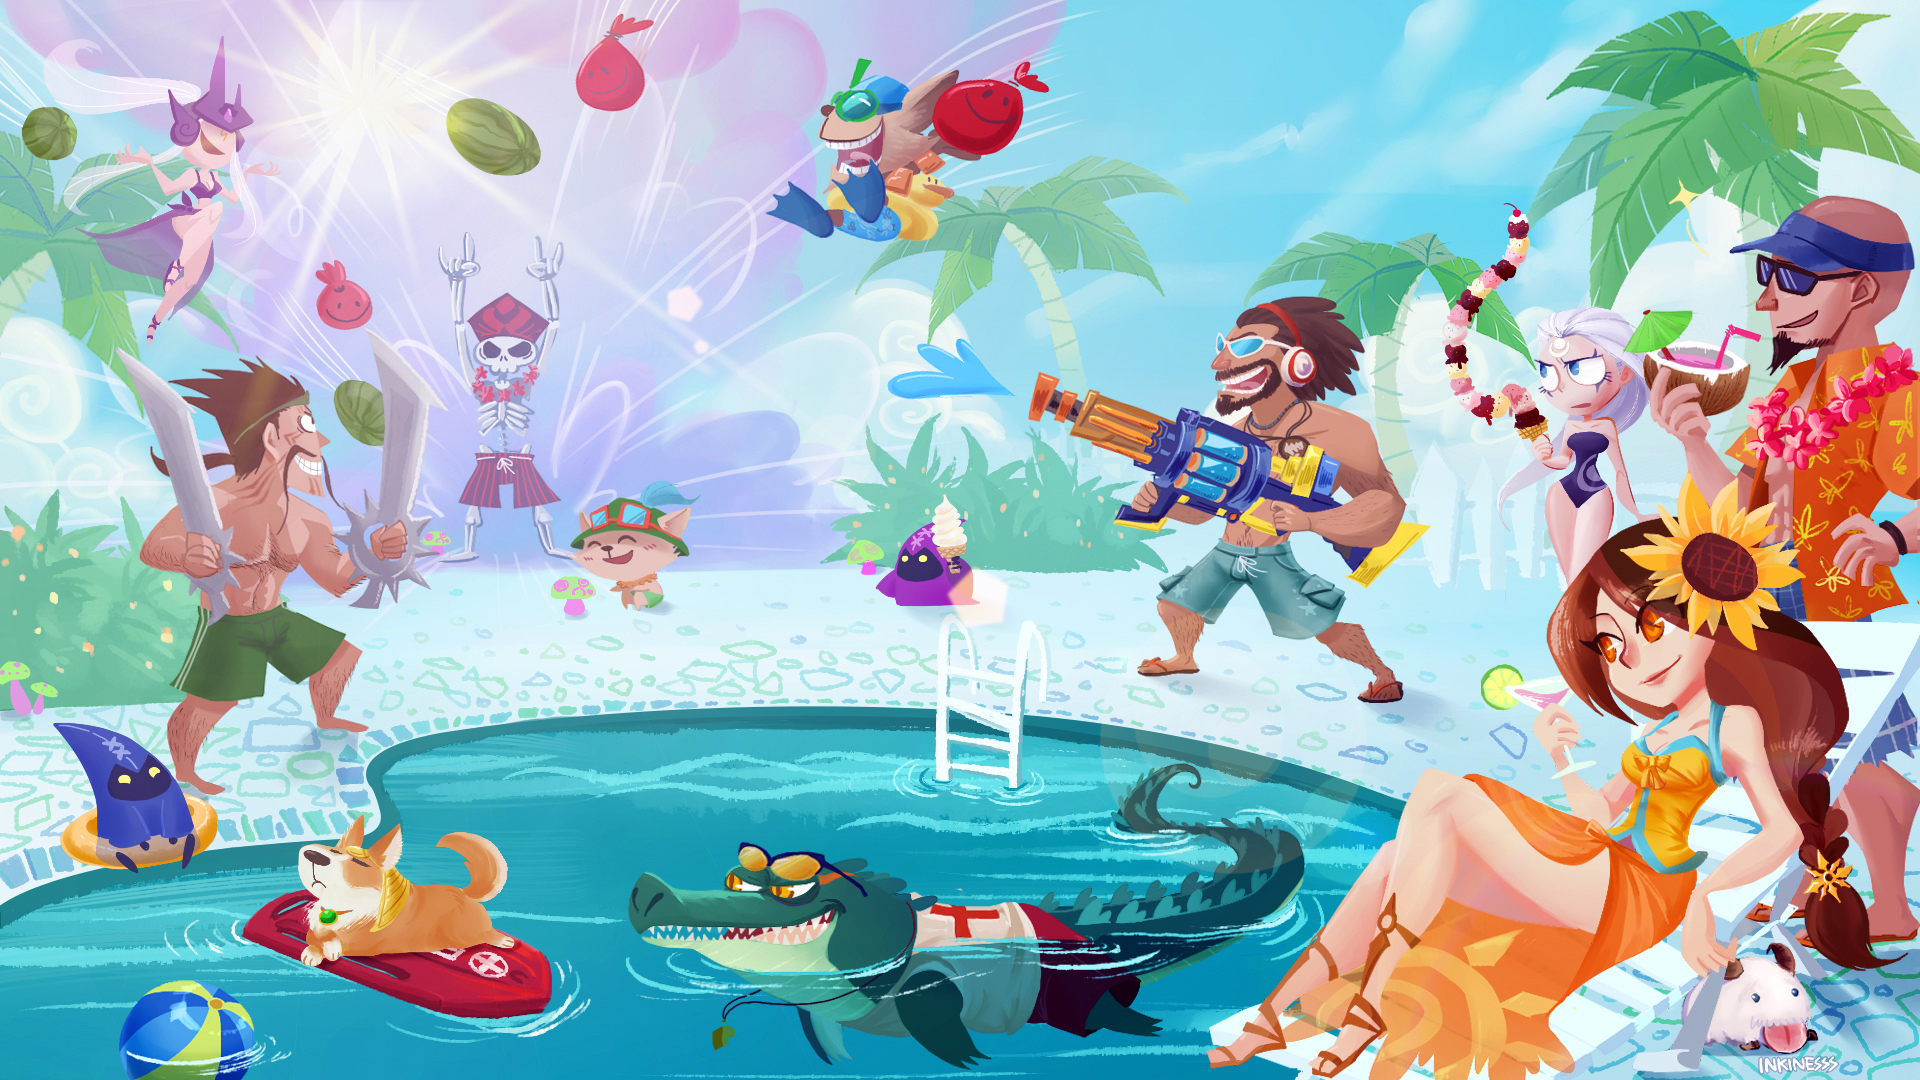 Summer Pool Party League Of Legends Draven Graves Syndra Teemo Ziggs